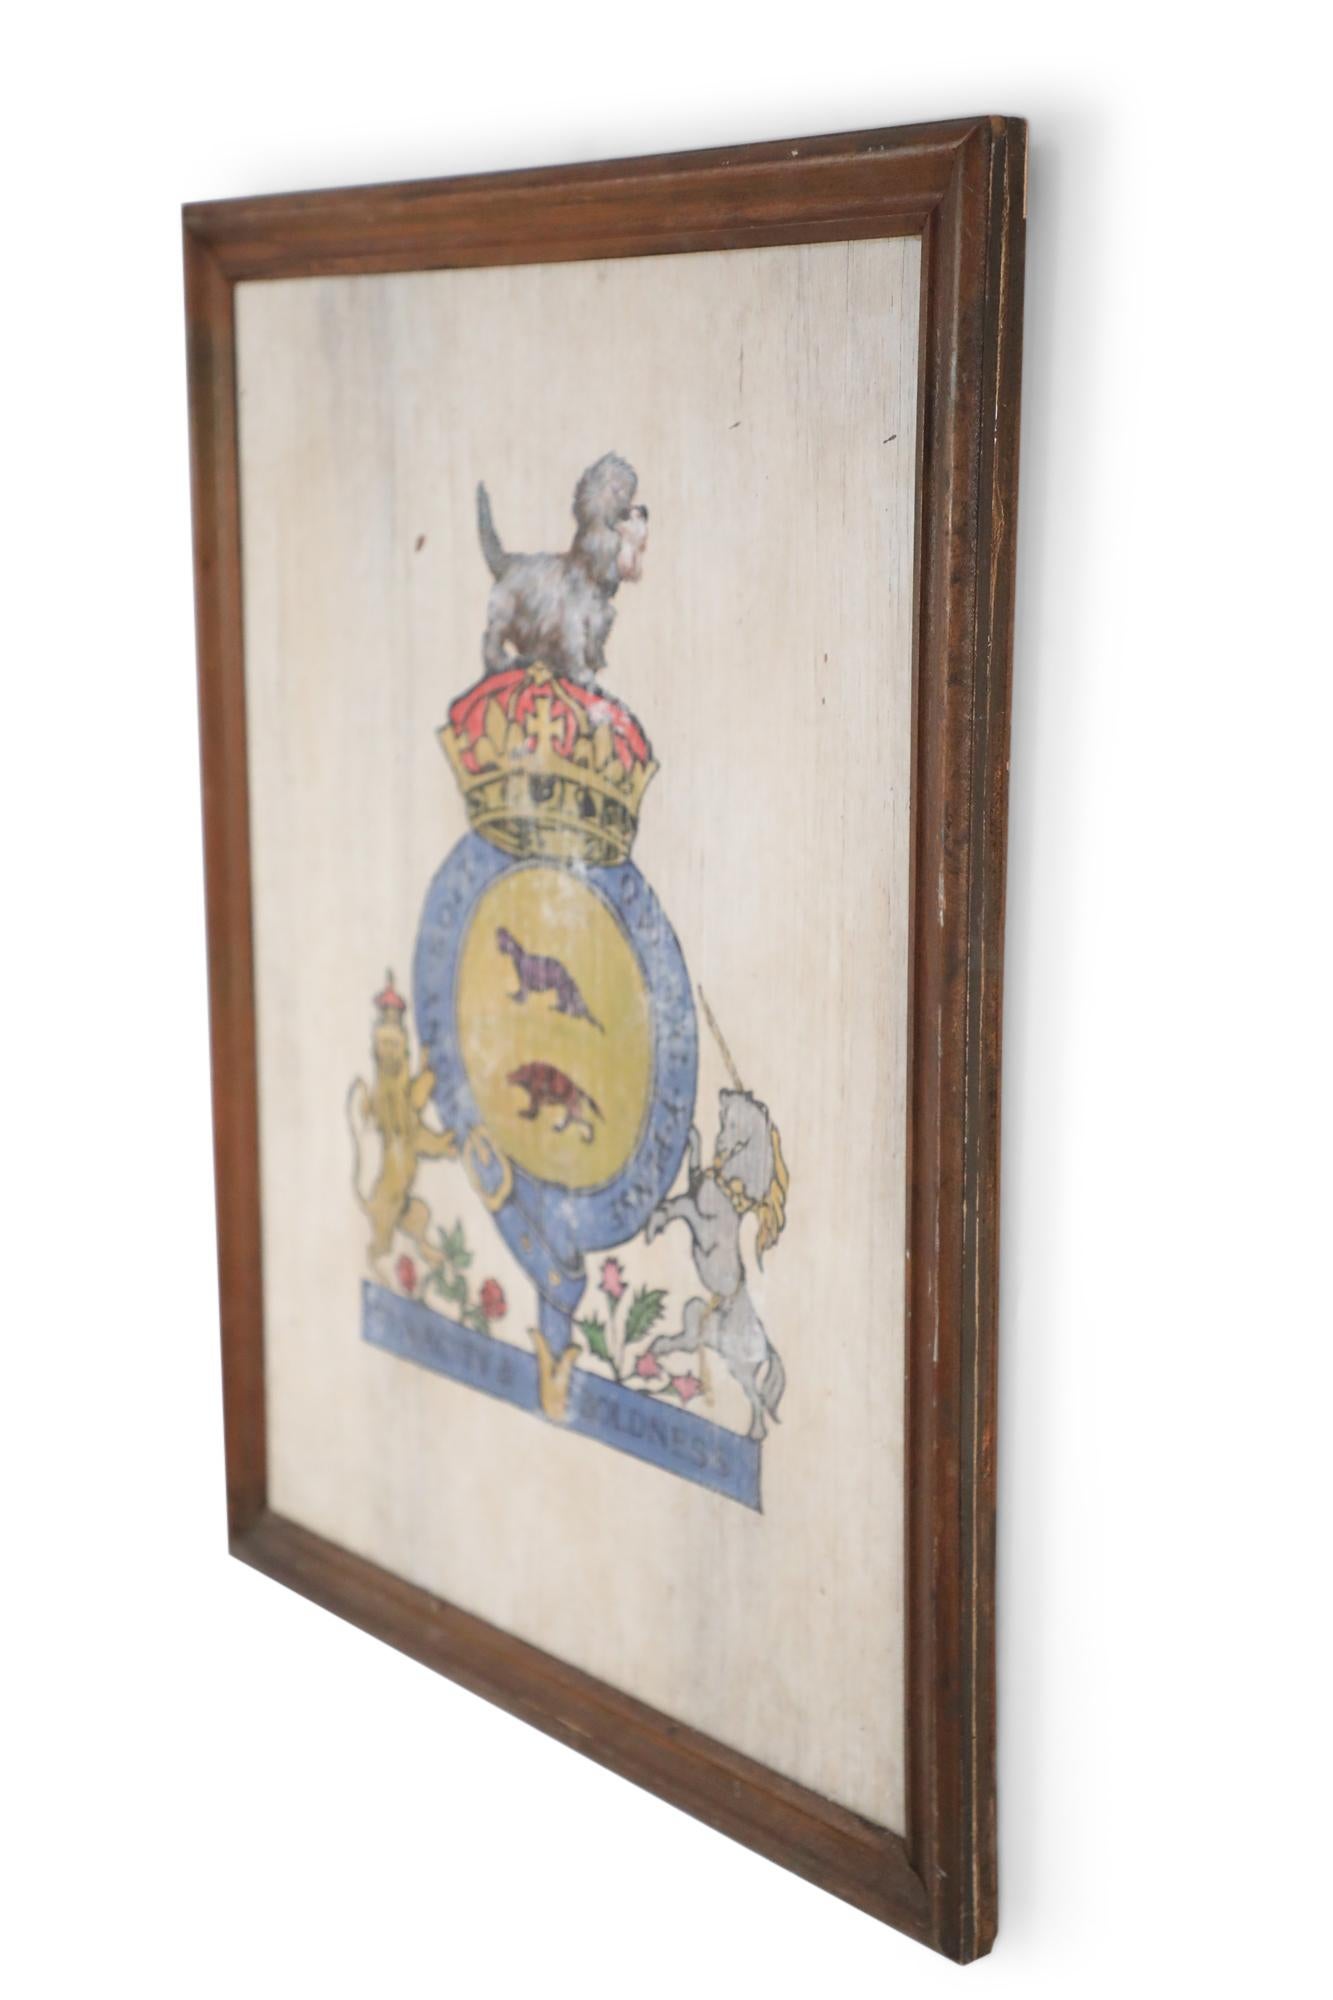 Vintage (20th Century) coat of arms, painted on weathered wood in a rectangular beveled walnut frame, depicting a small gray dog perched on a crown atop a blue and gold crest circling two animal silhouettes, and flanked by a lion and unicorn over